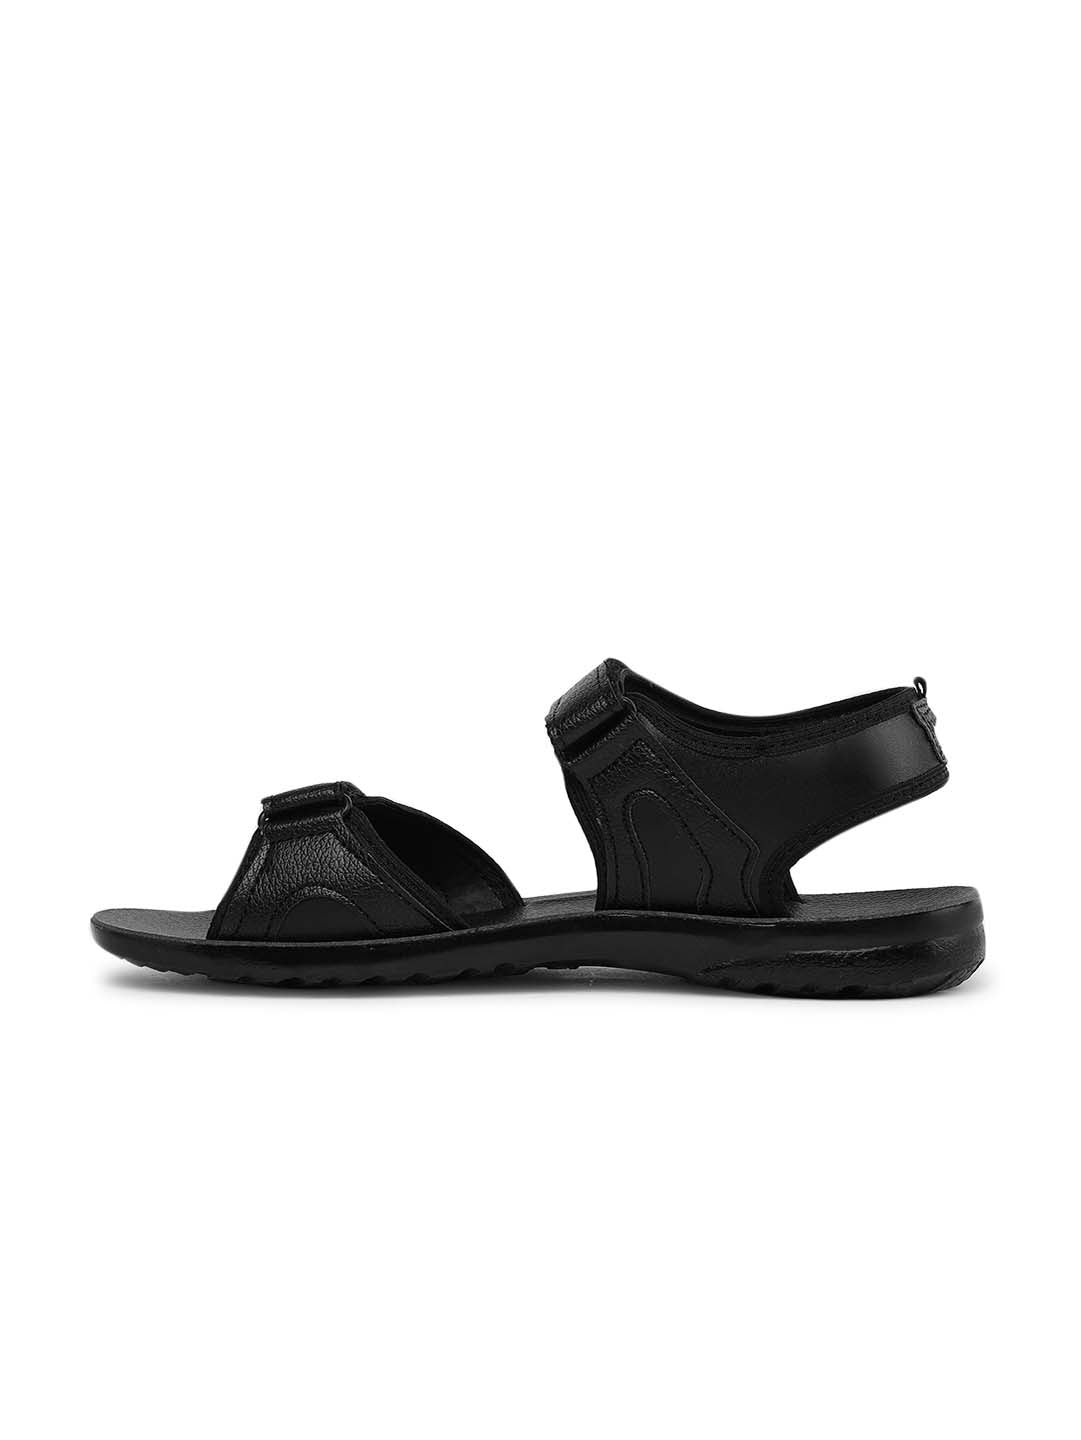 Paragon PU8885G Men Stylish Sandals | Comfortable Sandals for Daily Outdoor Use | Casual Formal Sandals with Cushioned Soles